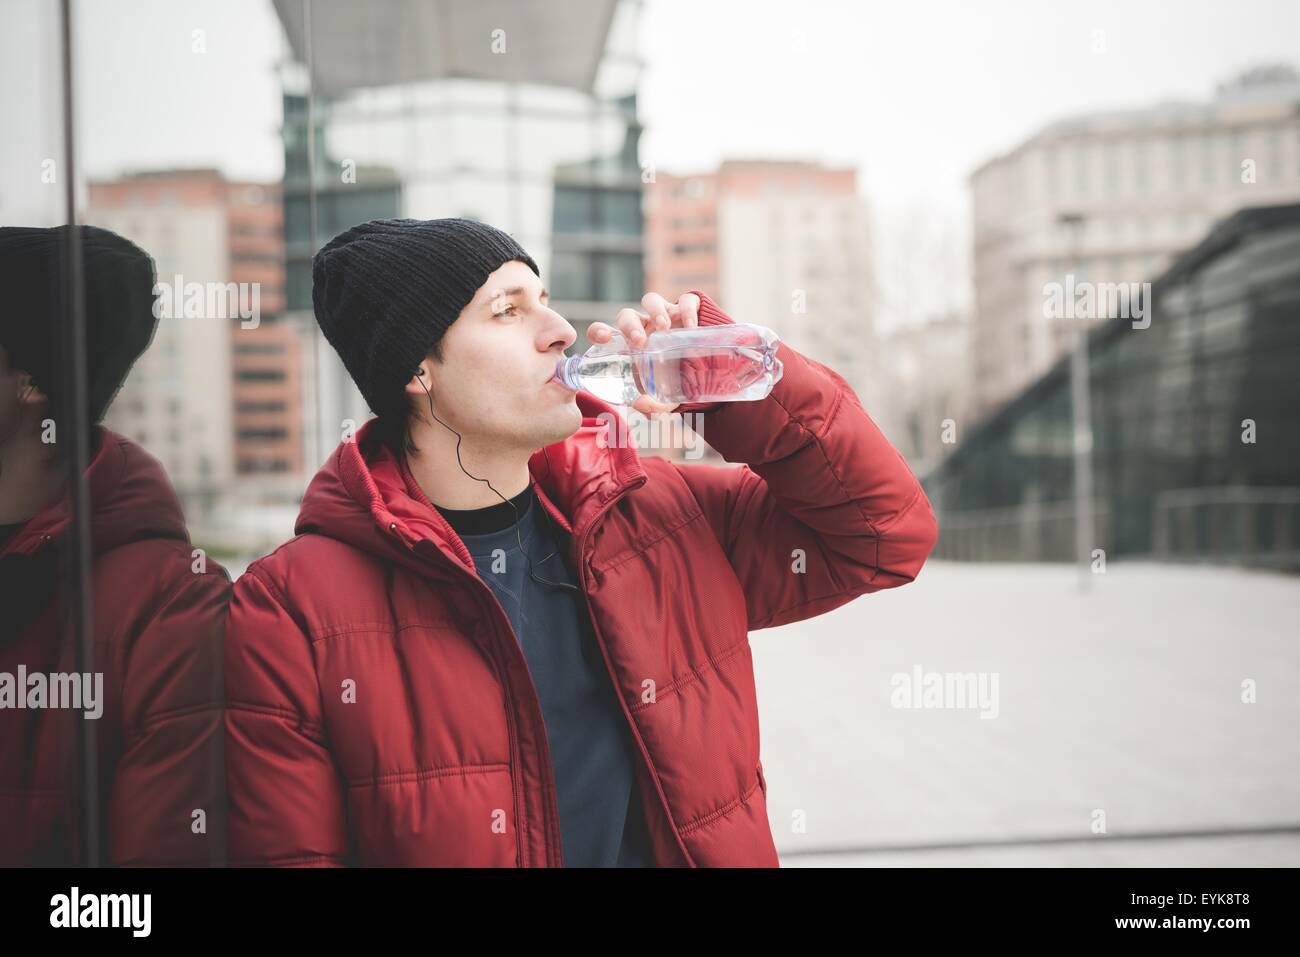 Young man leaning against office building drinking water Stock Photo